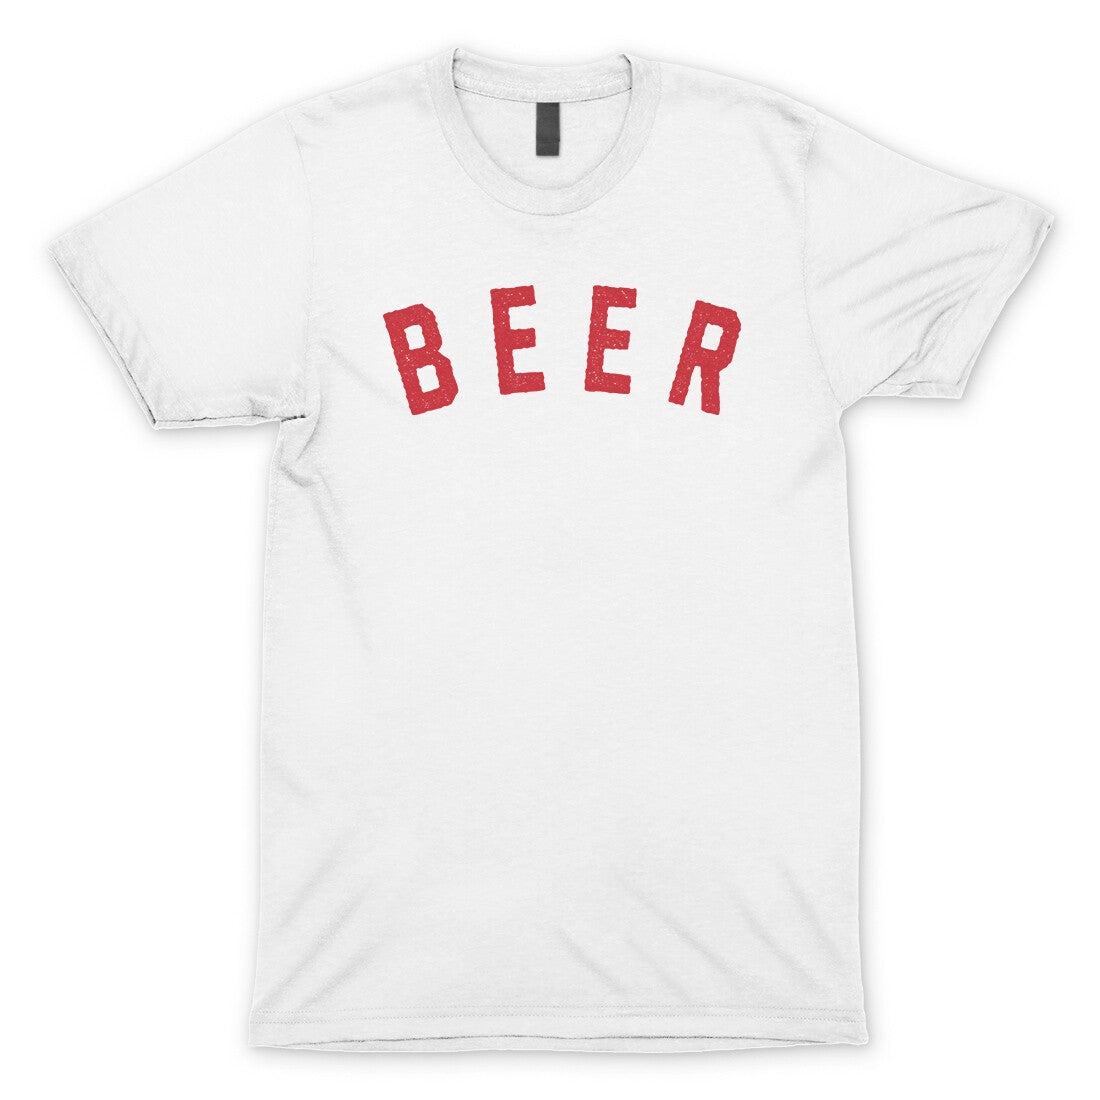 Beer in White Color